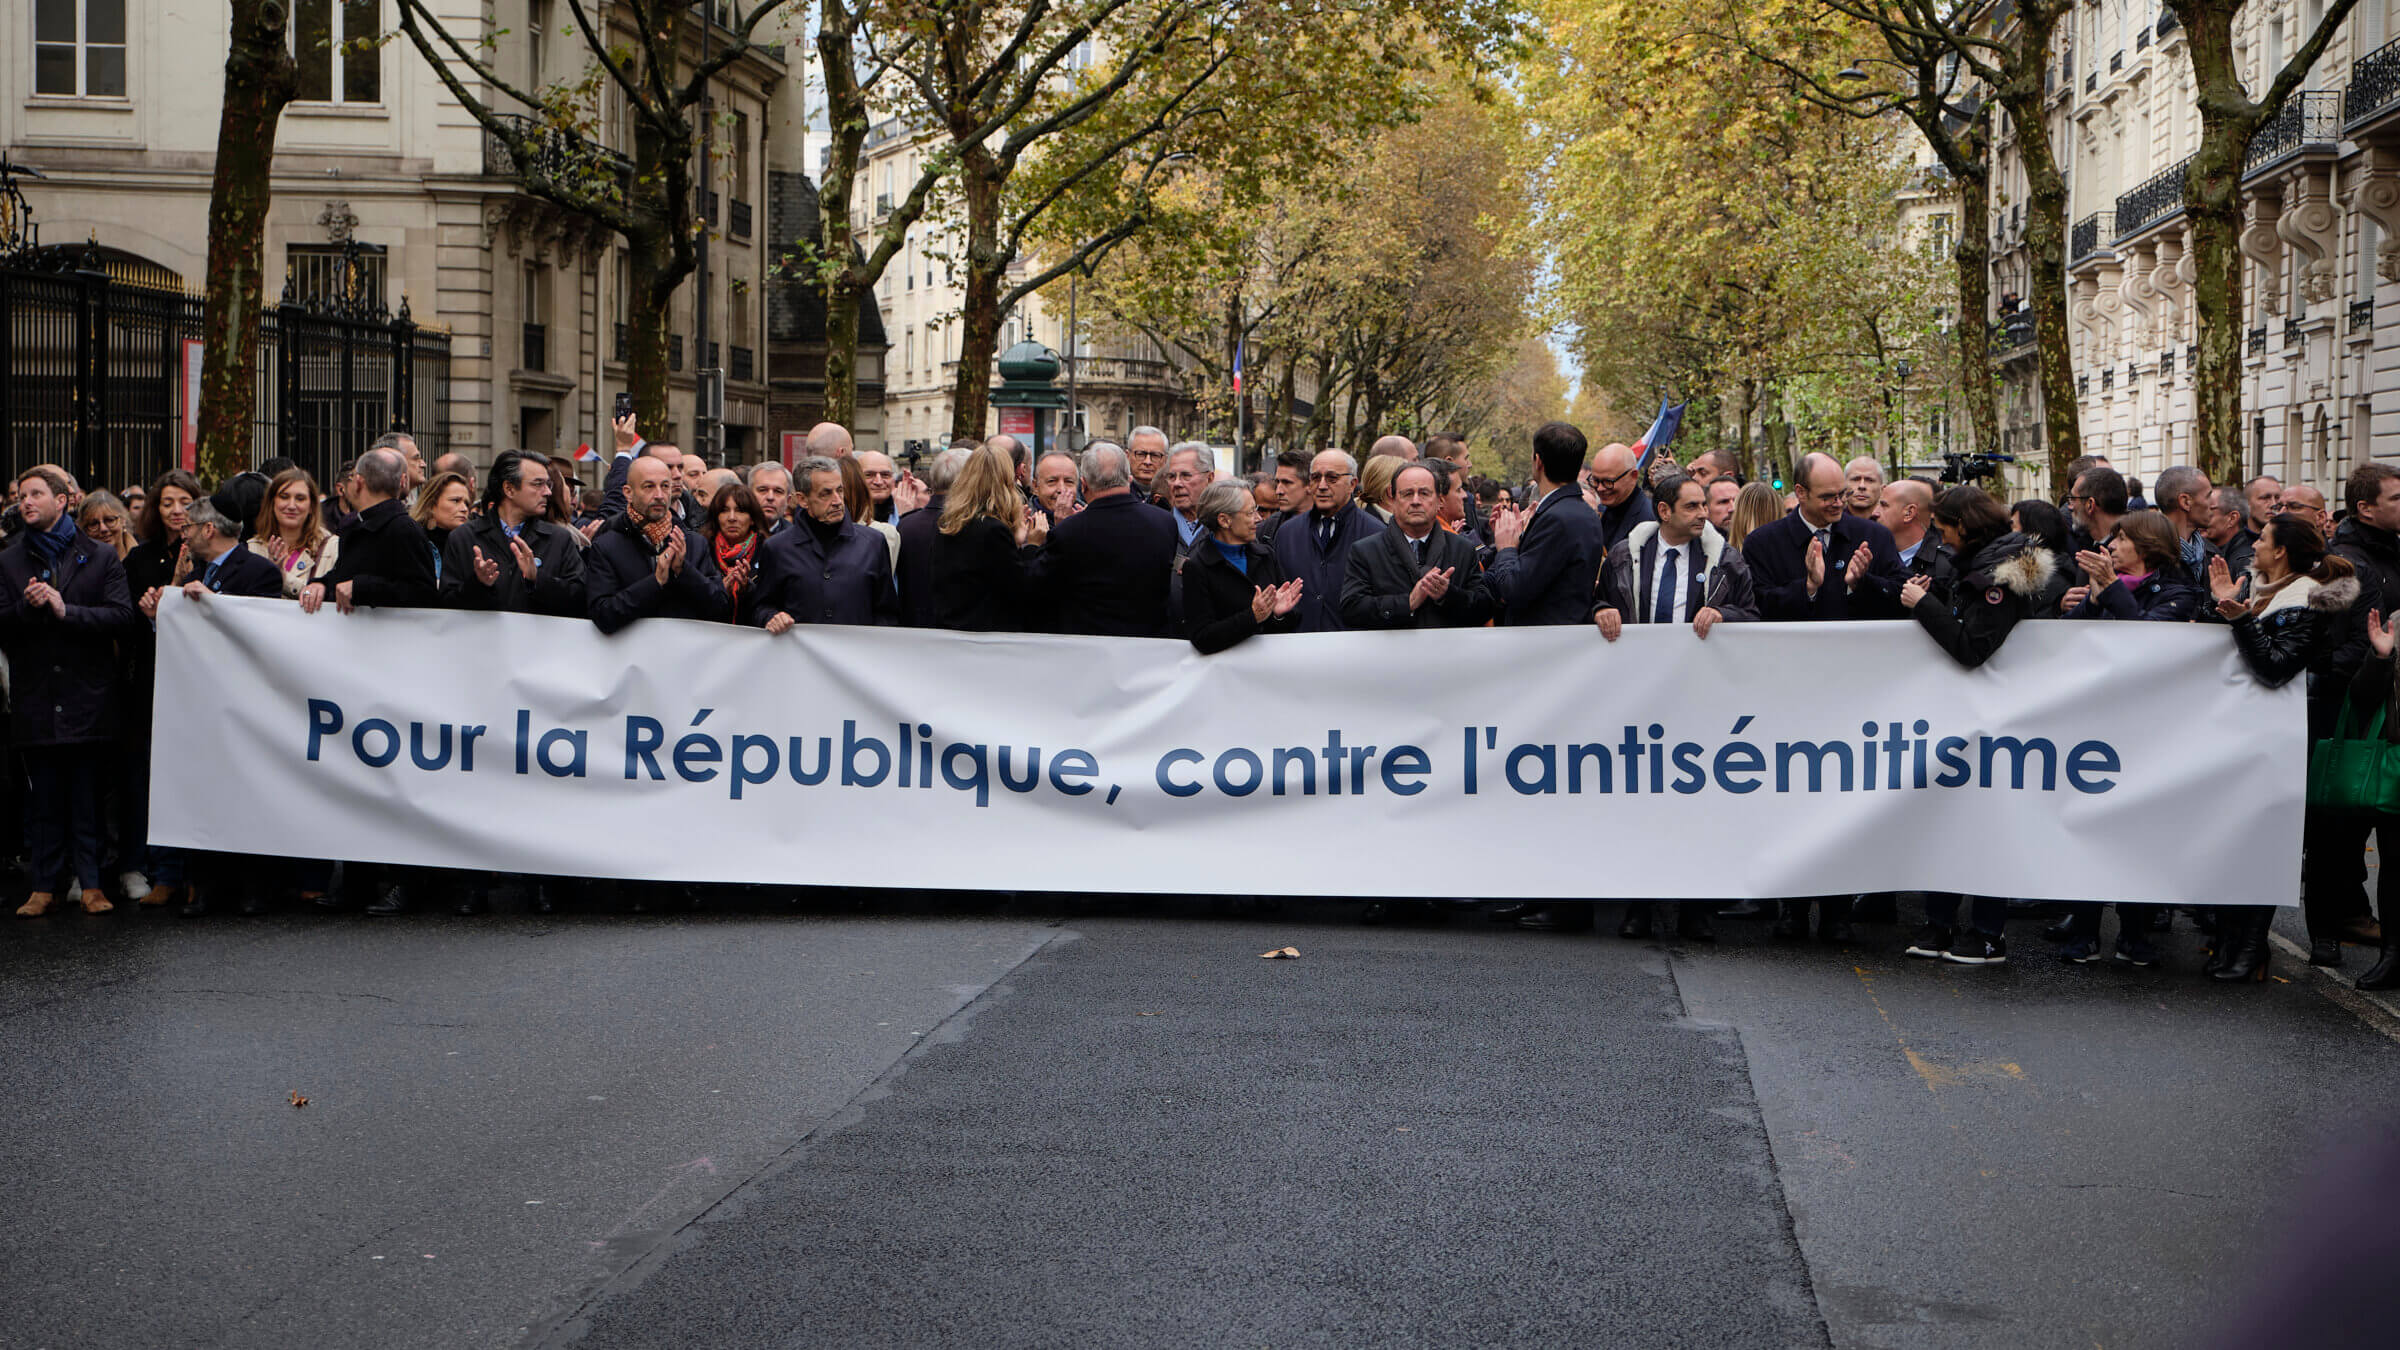 Former French Presidents Nicolas Sarkozy and Francois Hollande were among those at the French march against antisemitism.